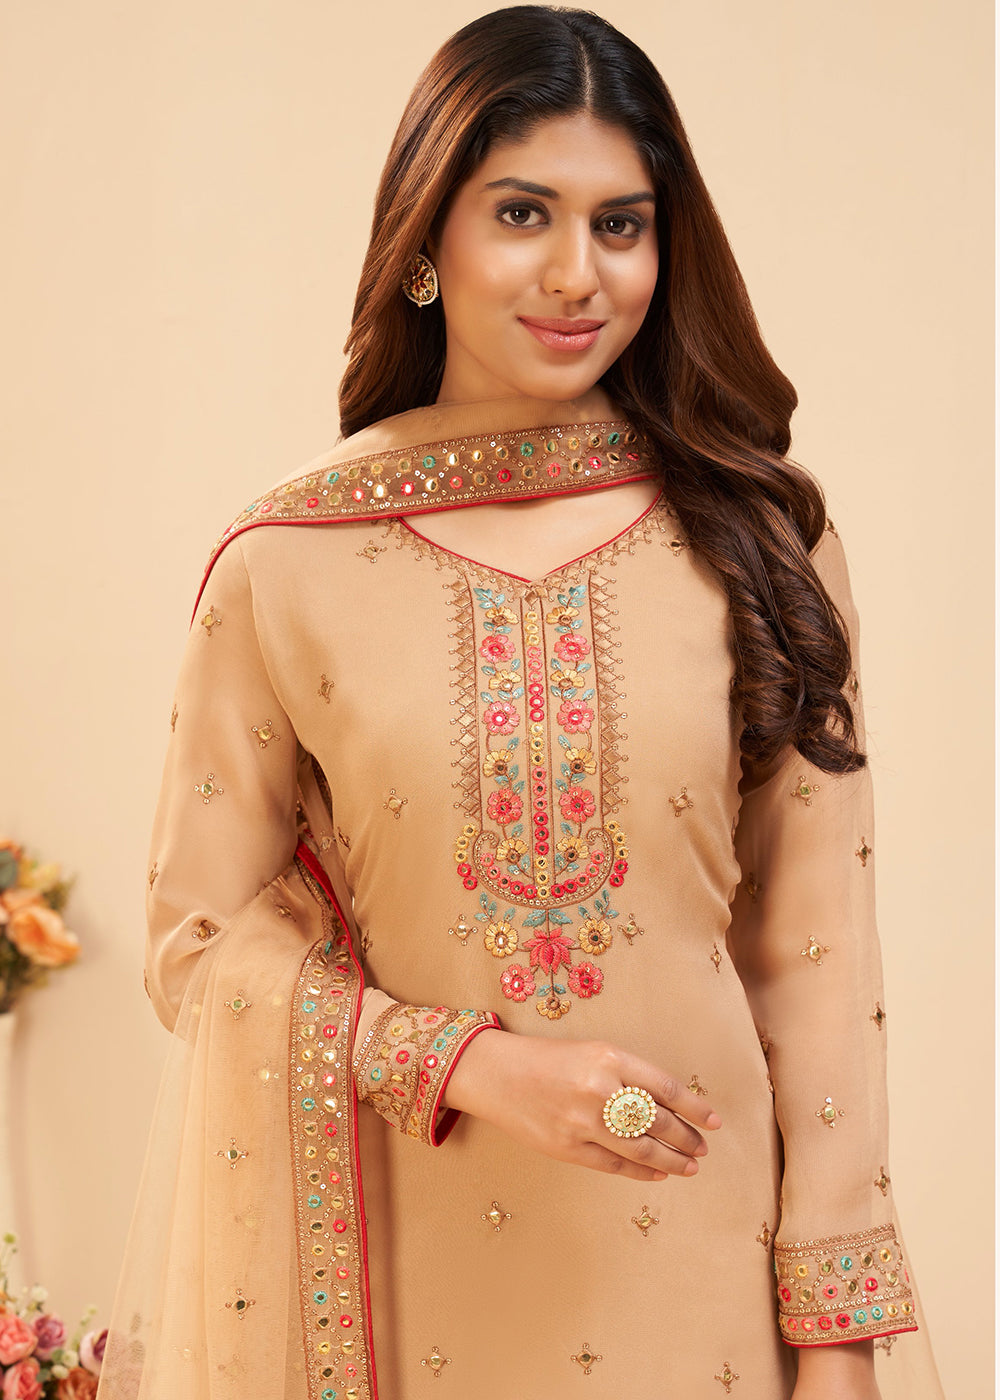 Shop Now Pretty Chikoo Beige Wedding Embroidered Sharara Suit Online at Empress Clothing in USA, UK, Canada, Germany & Worldwide.